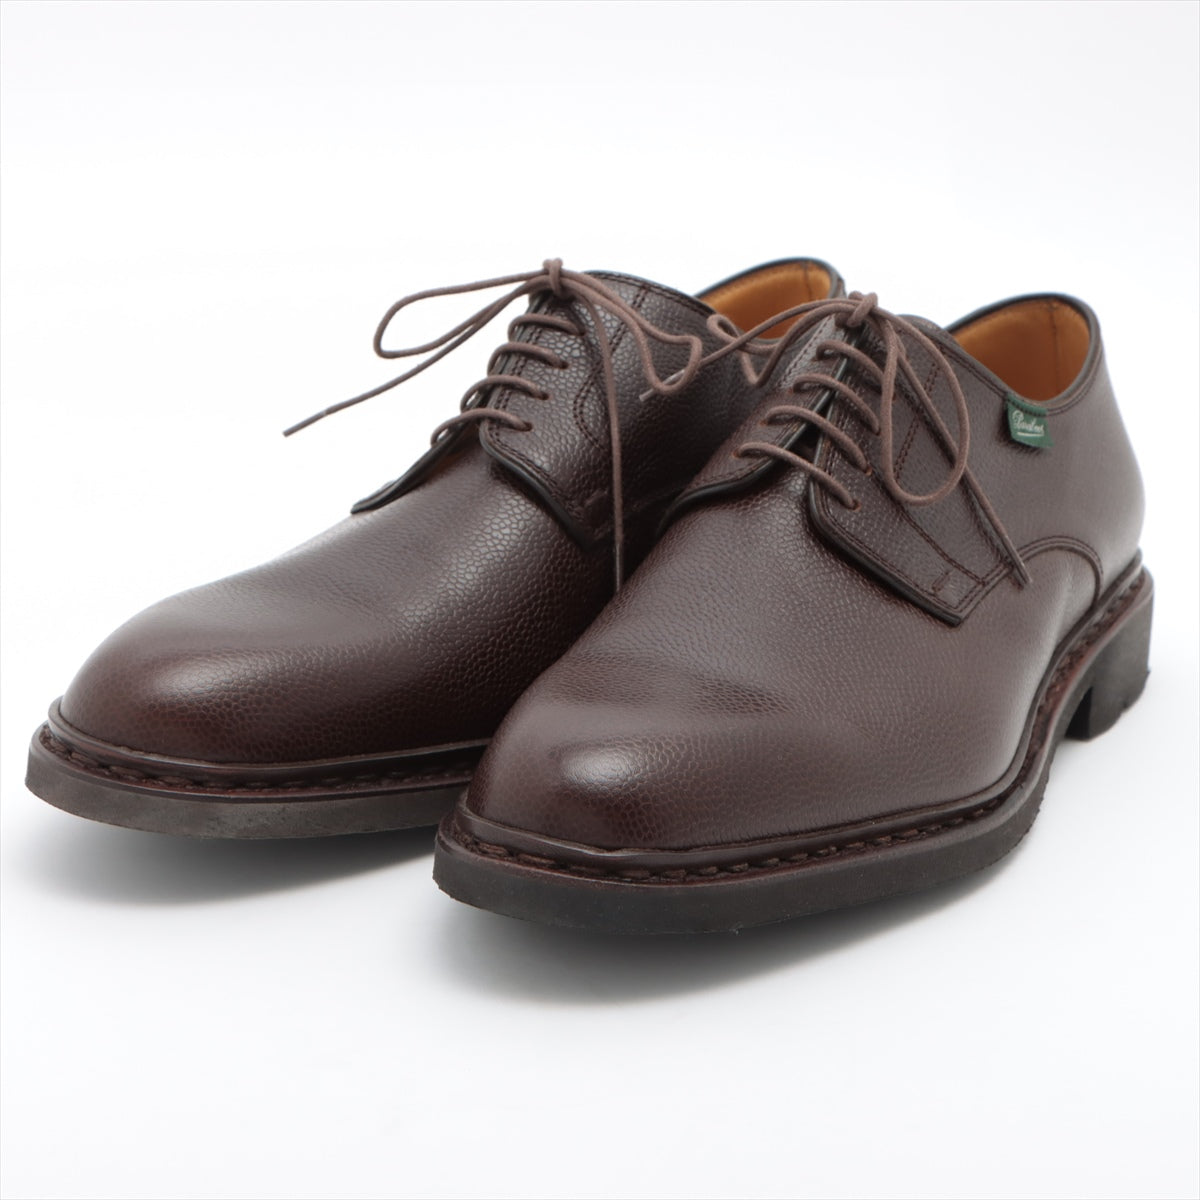 Paraboot Leather Shoes 8.5 Men's Brown